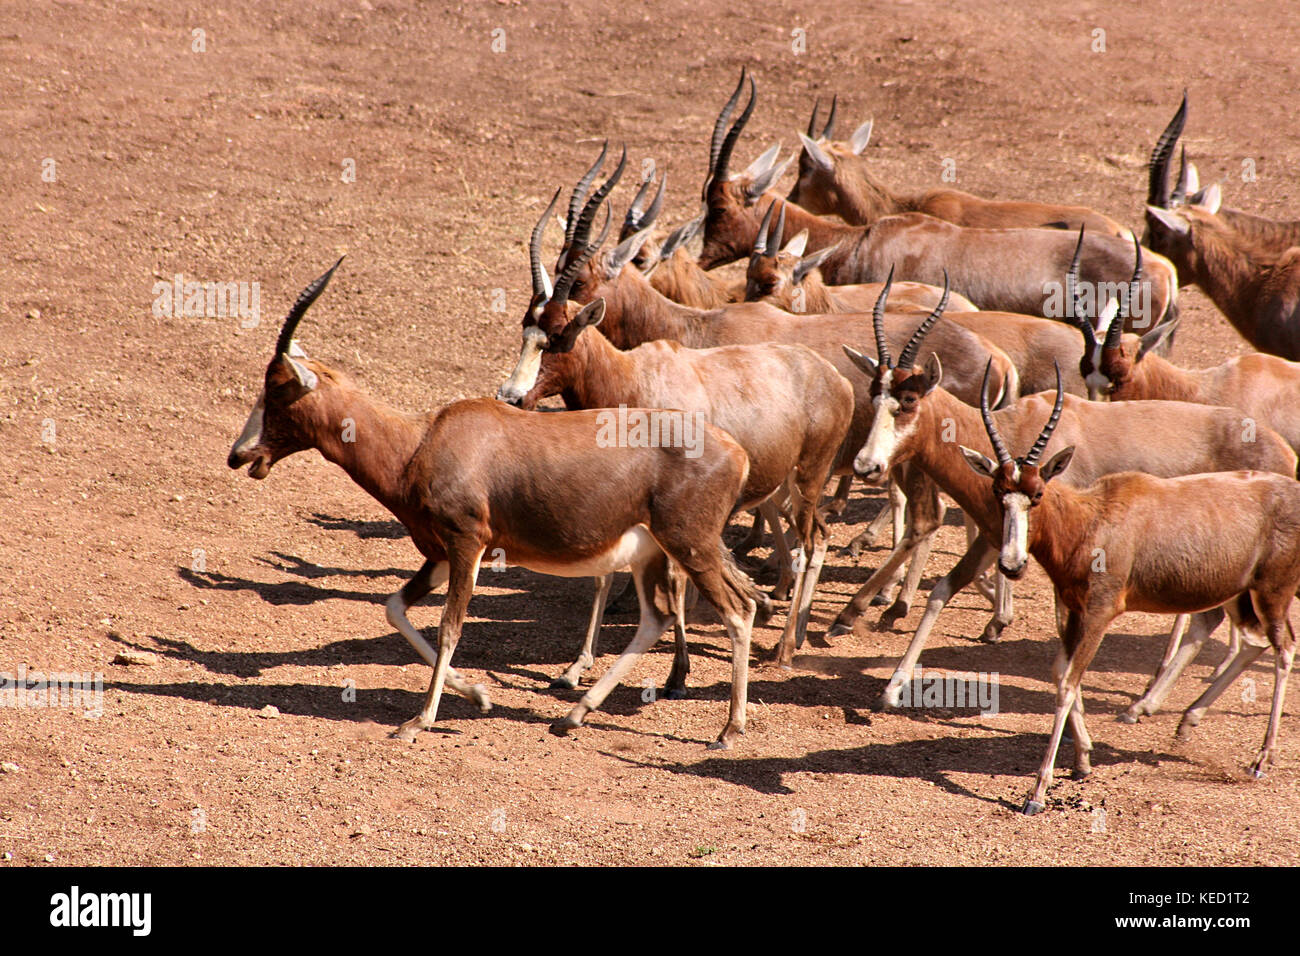 Herd of Blesbok Antelope running across the dusty ground in Limpopo Province, South Africa Stock Photo